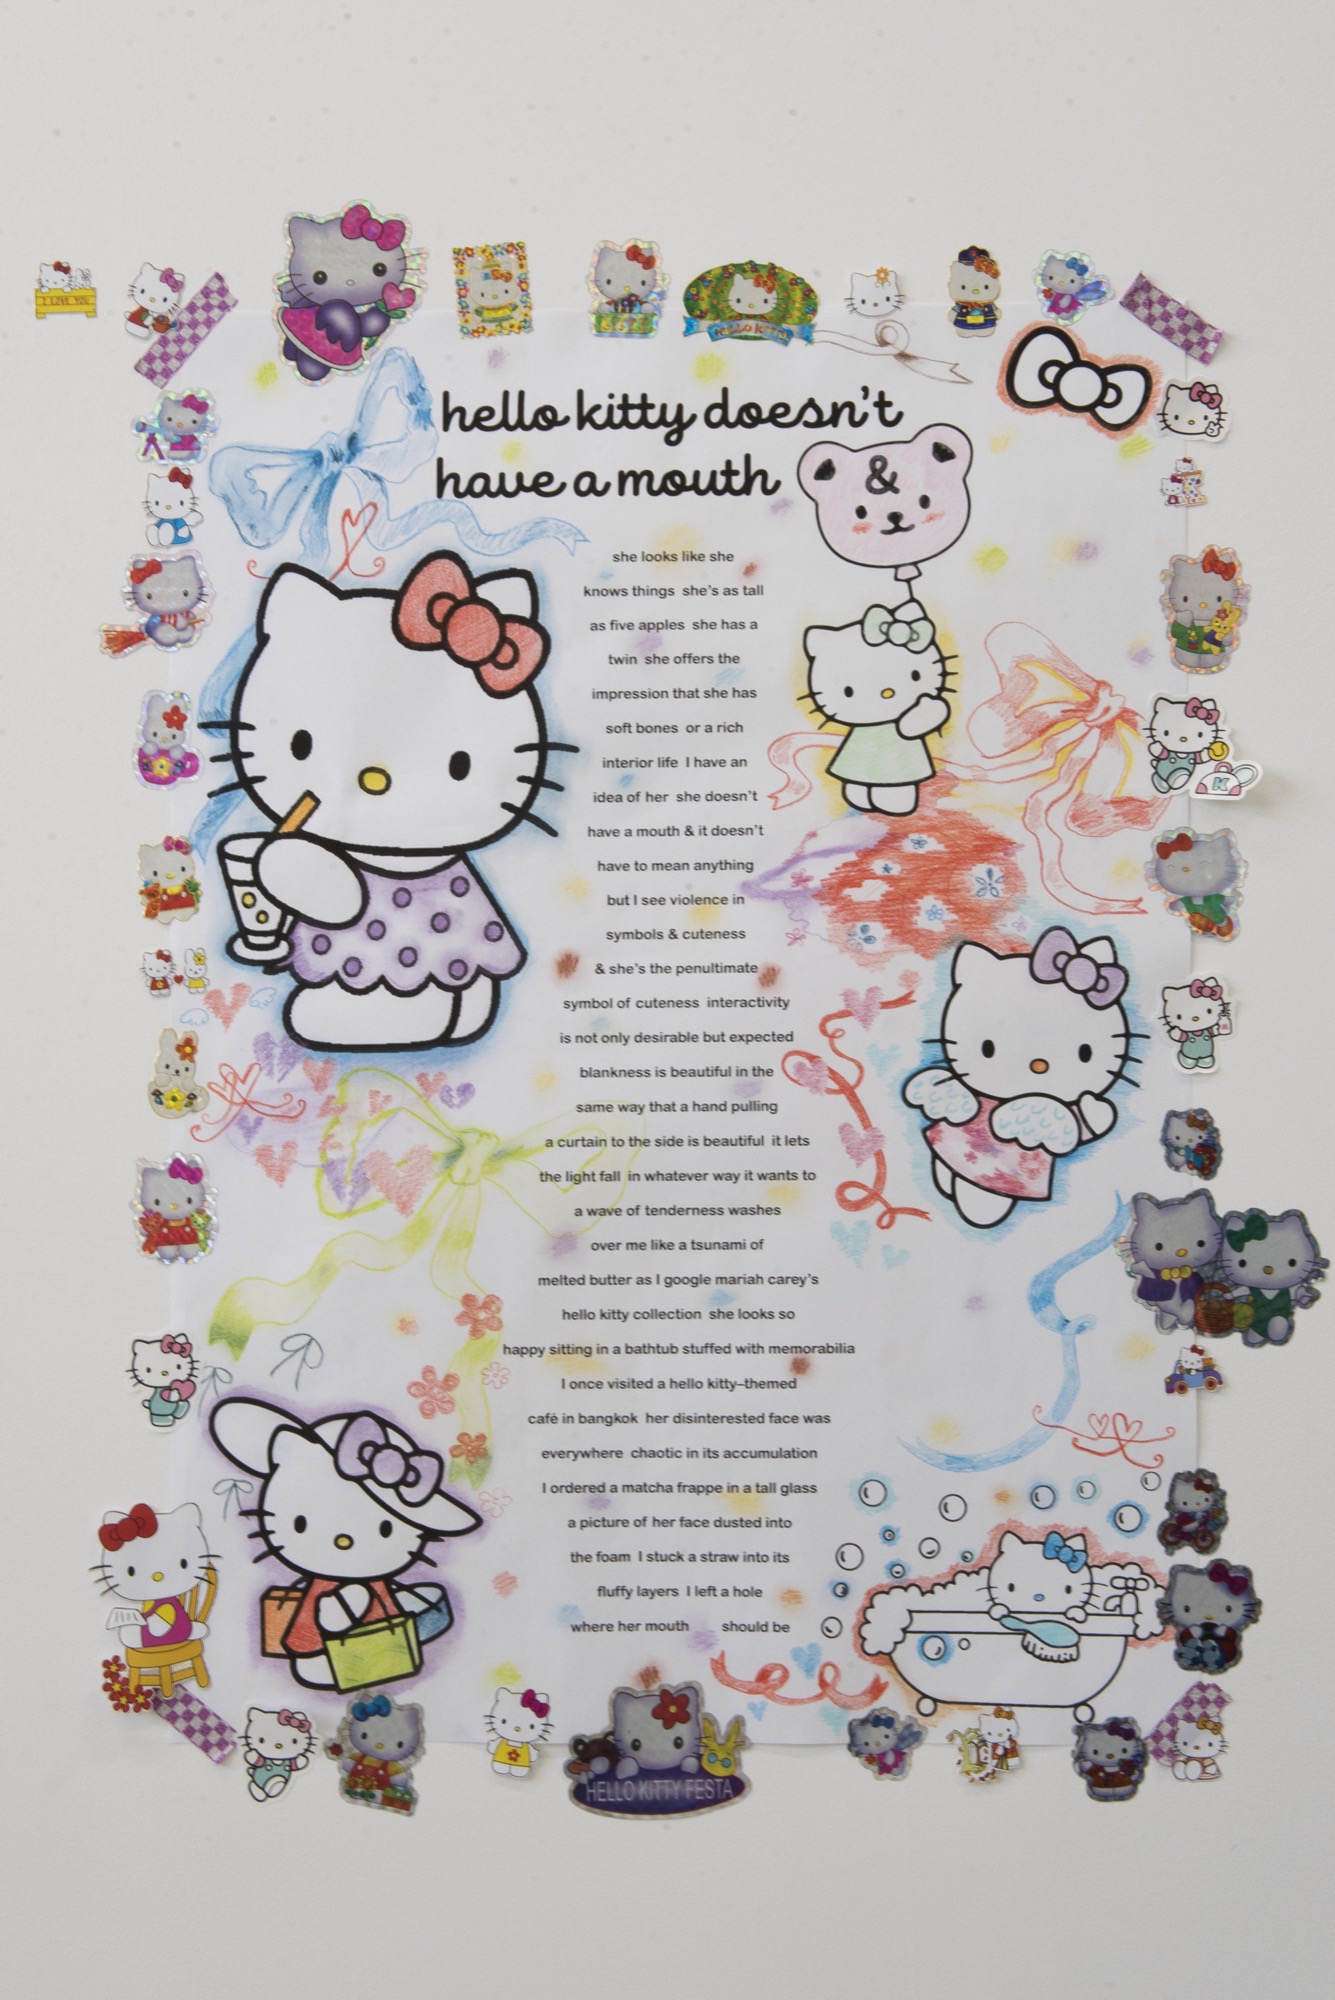 Jemi Gale and Panda Wong, <em>hello kitty doesn’t have a mouth</em>, 2021, inkjet print and pencil on paper, stickers, tape, dimensions variable, TCB Art Inc. Photo: Jordan Halsall